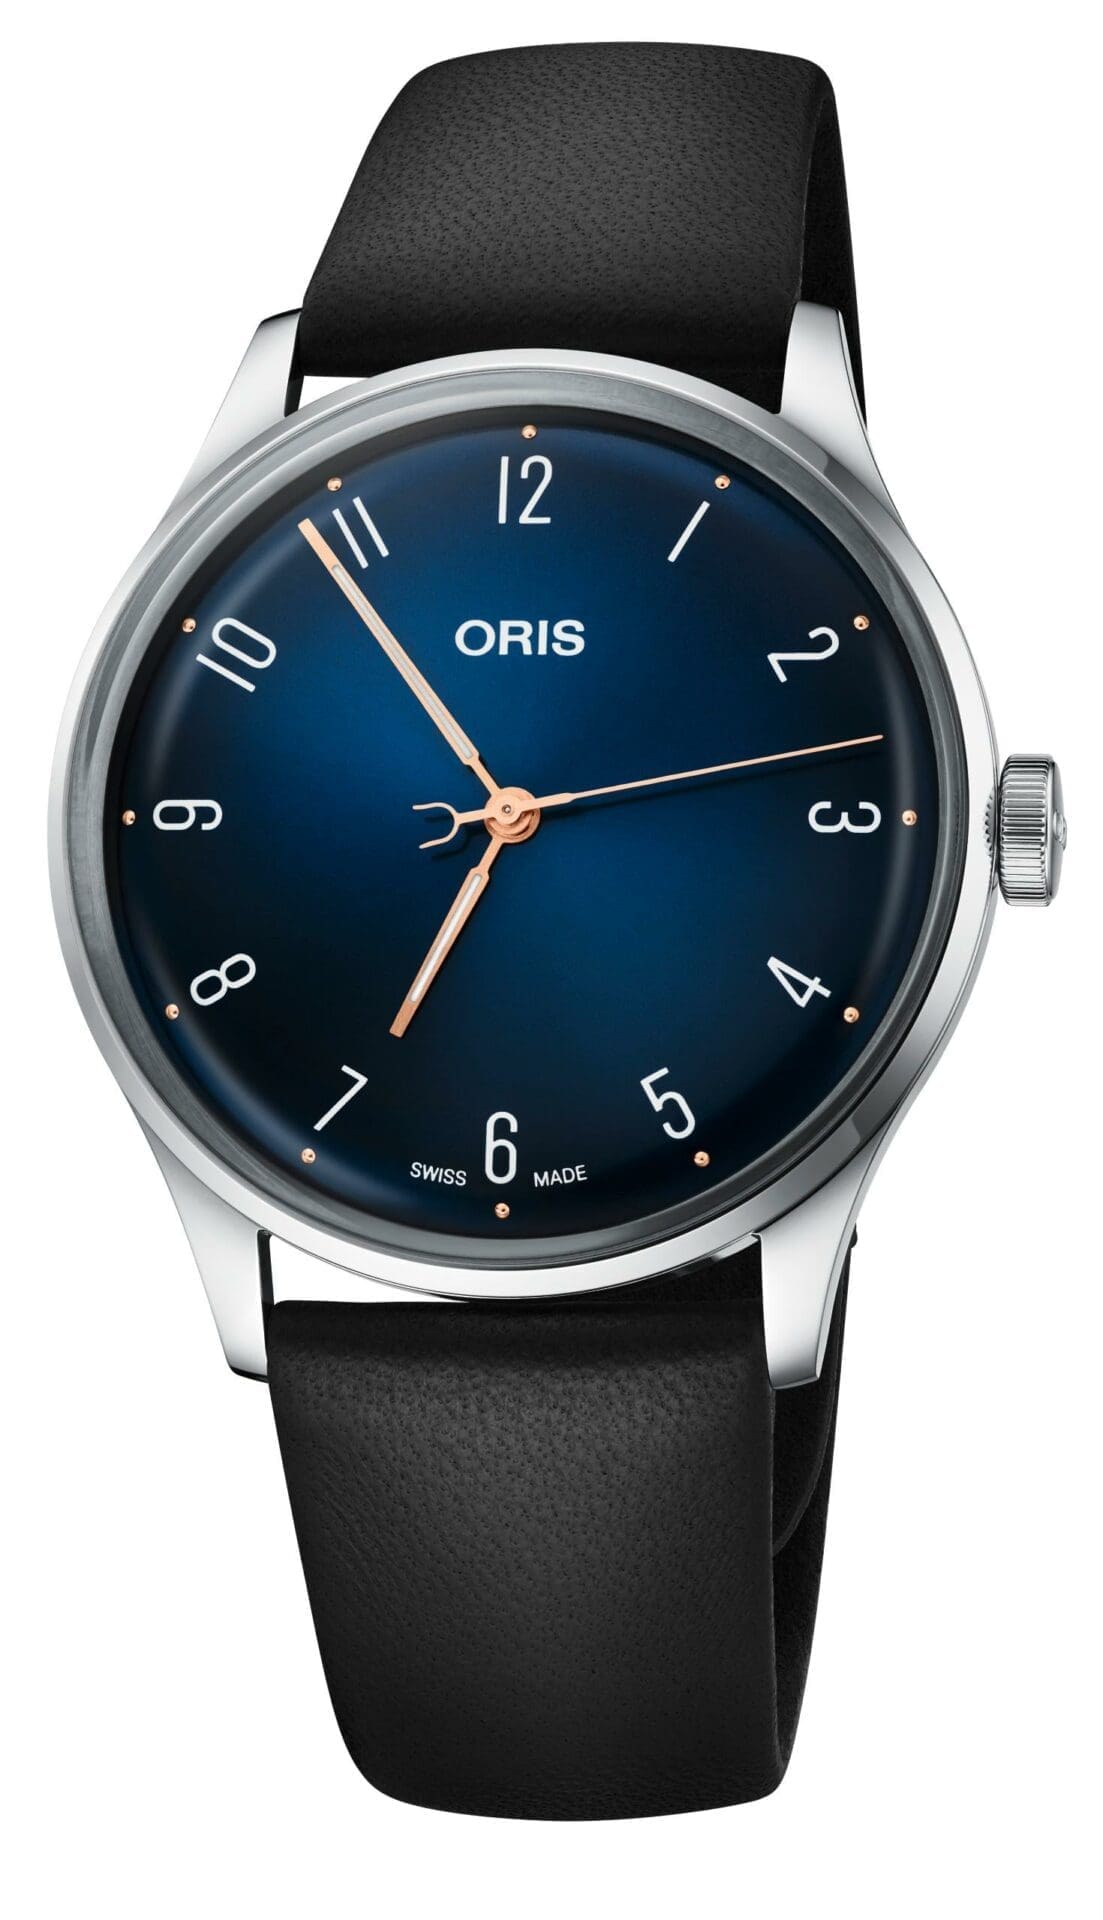 “Watch & Act!” Auction Item – Lot 9: An Oris from the jazz man James Morrison